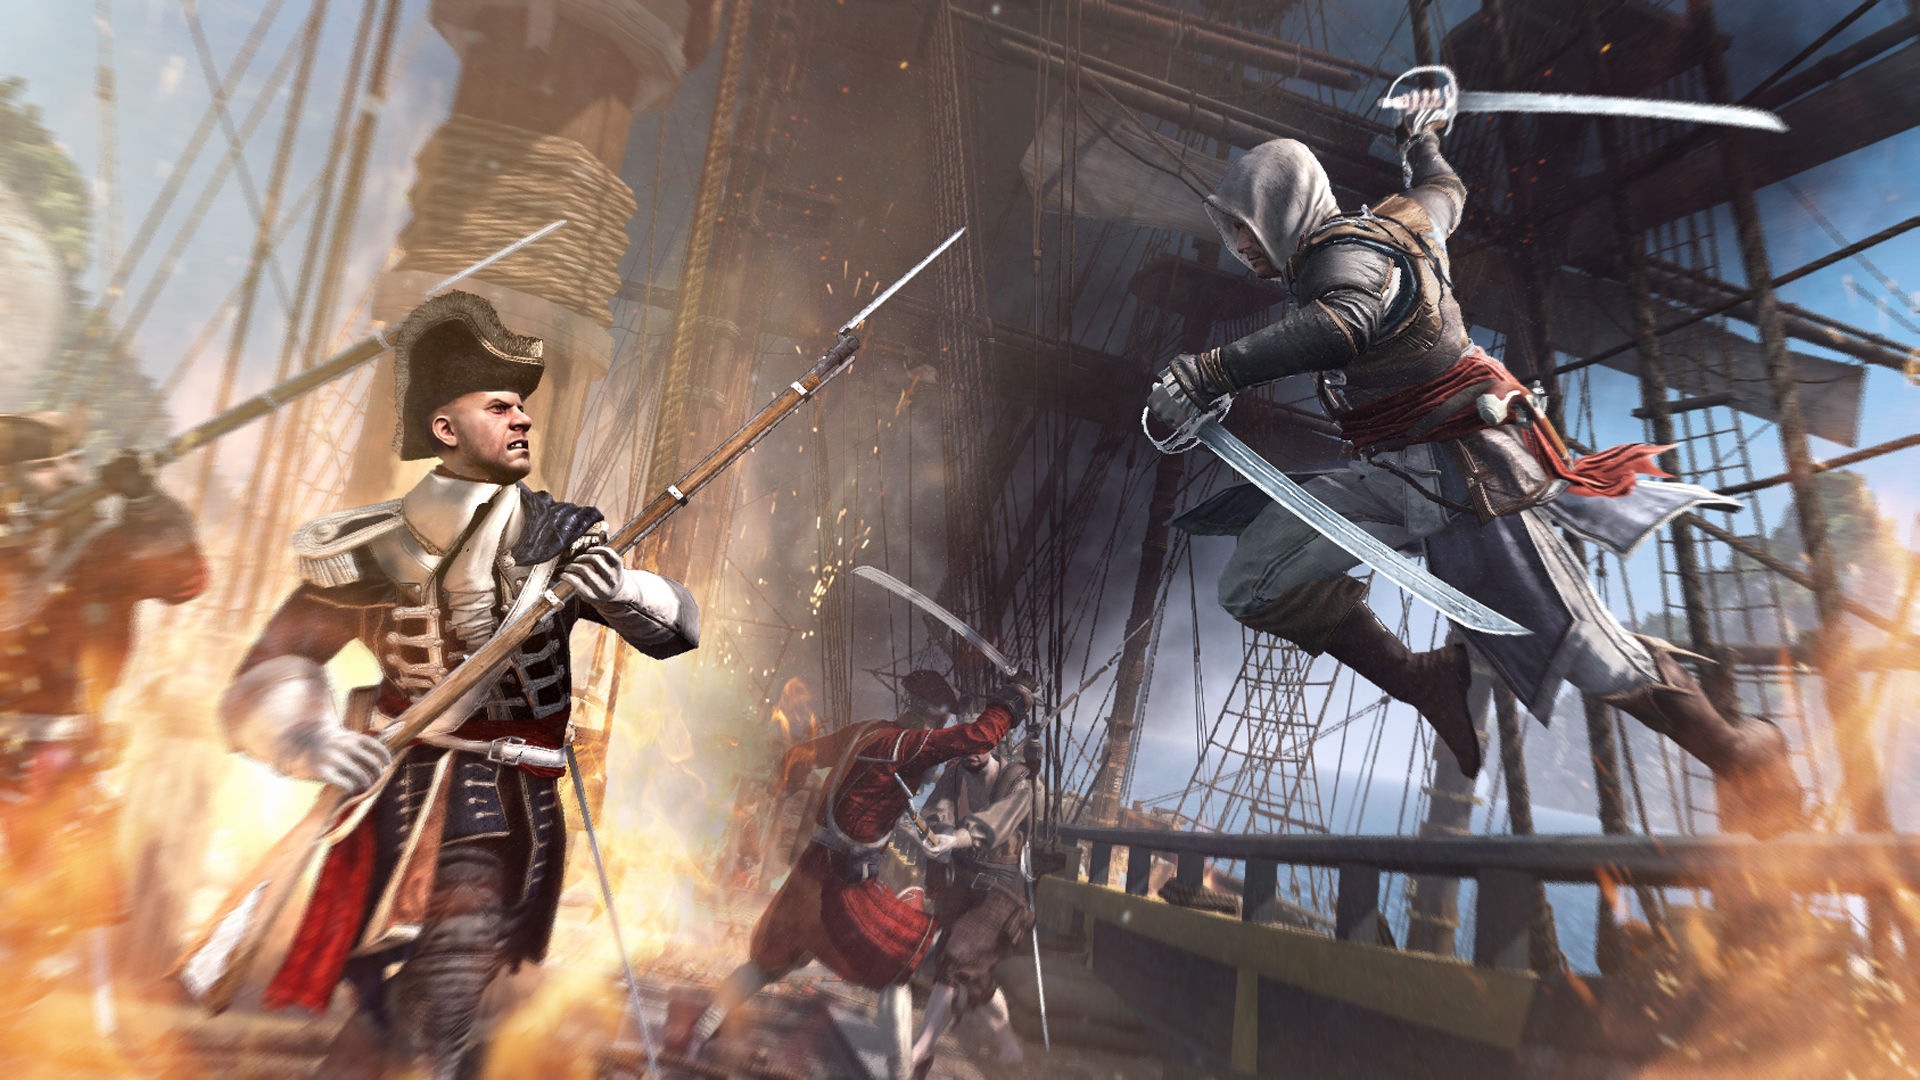 Assassin's Creed IV: Black Flag HD wallpapers #12 - 1920x1080